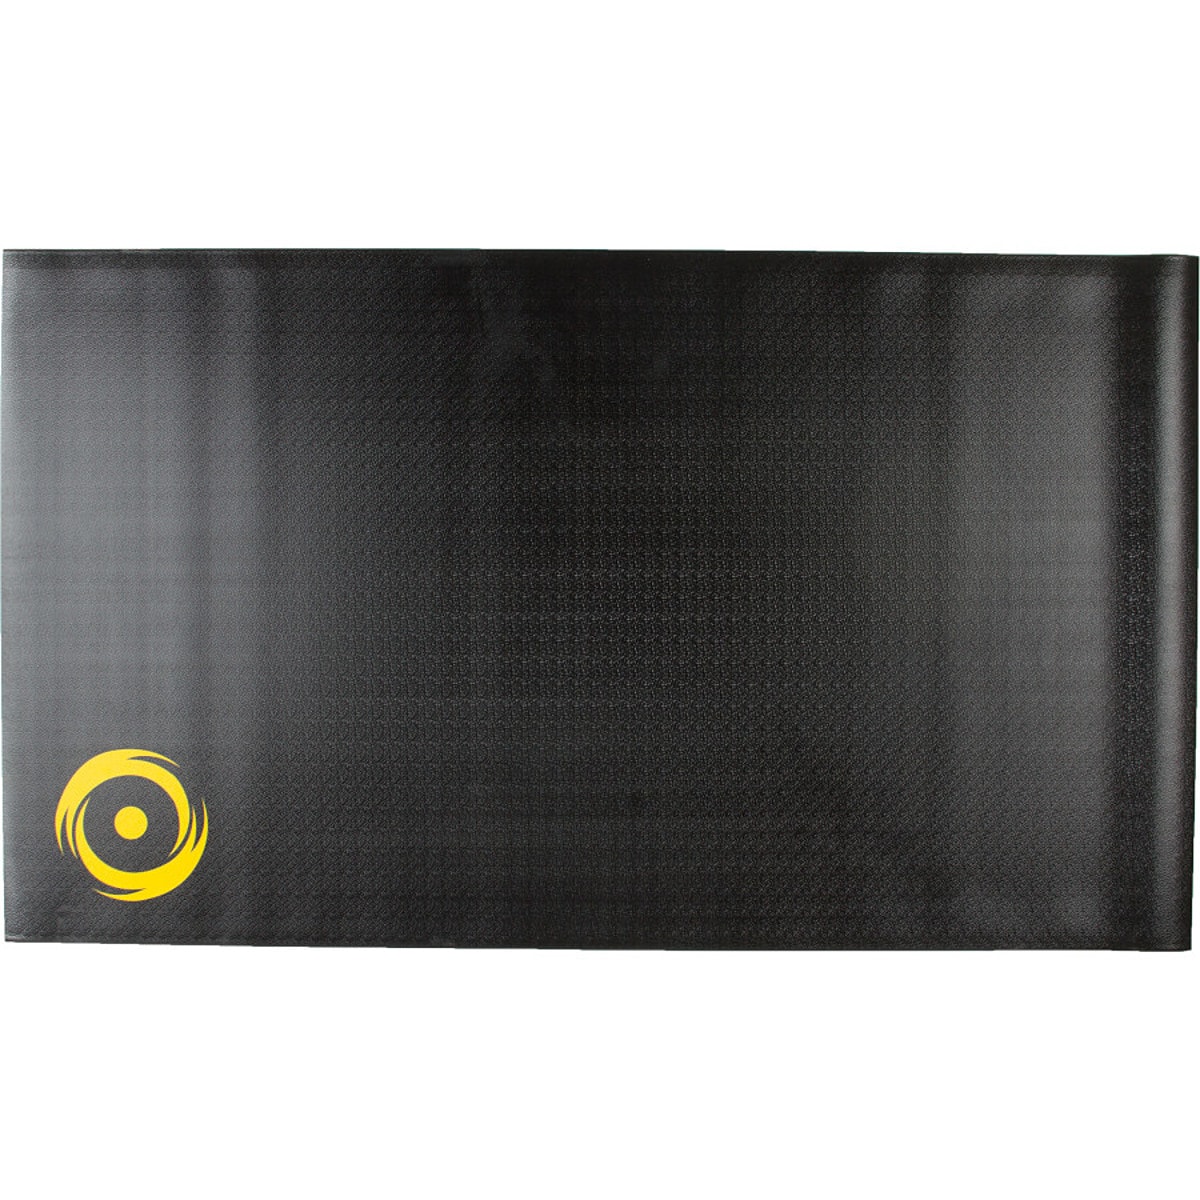 CycleOps Training Mat - 36in x 65in